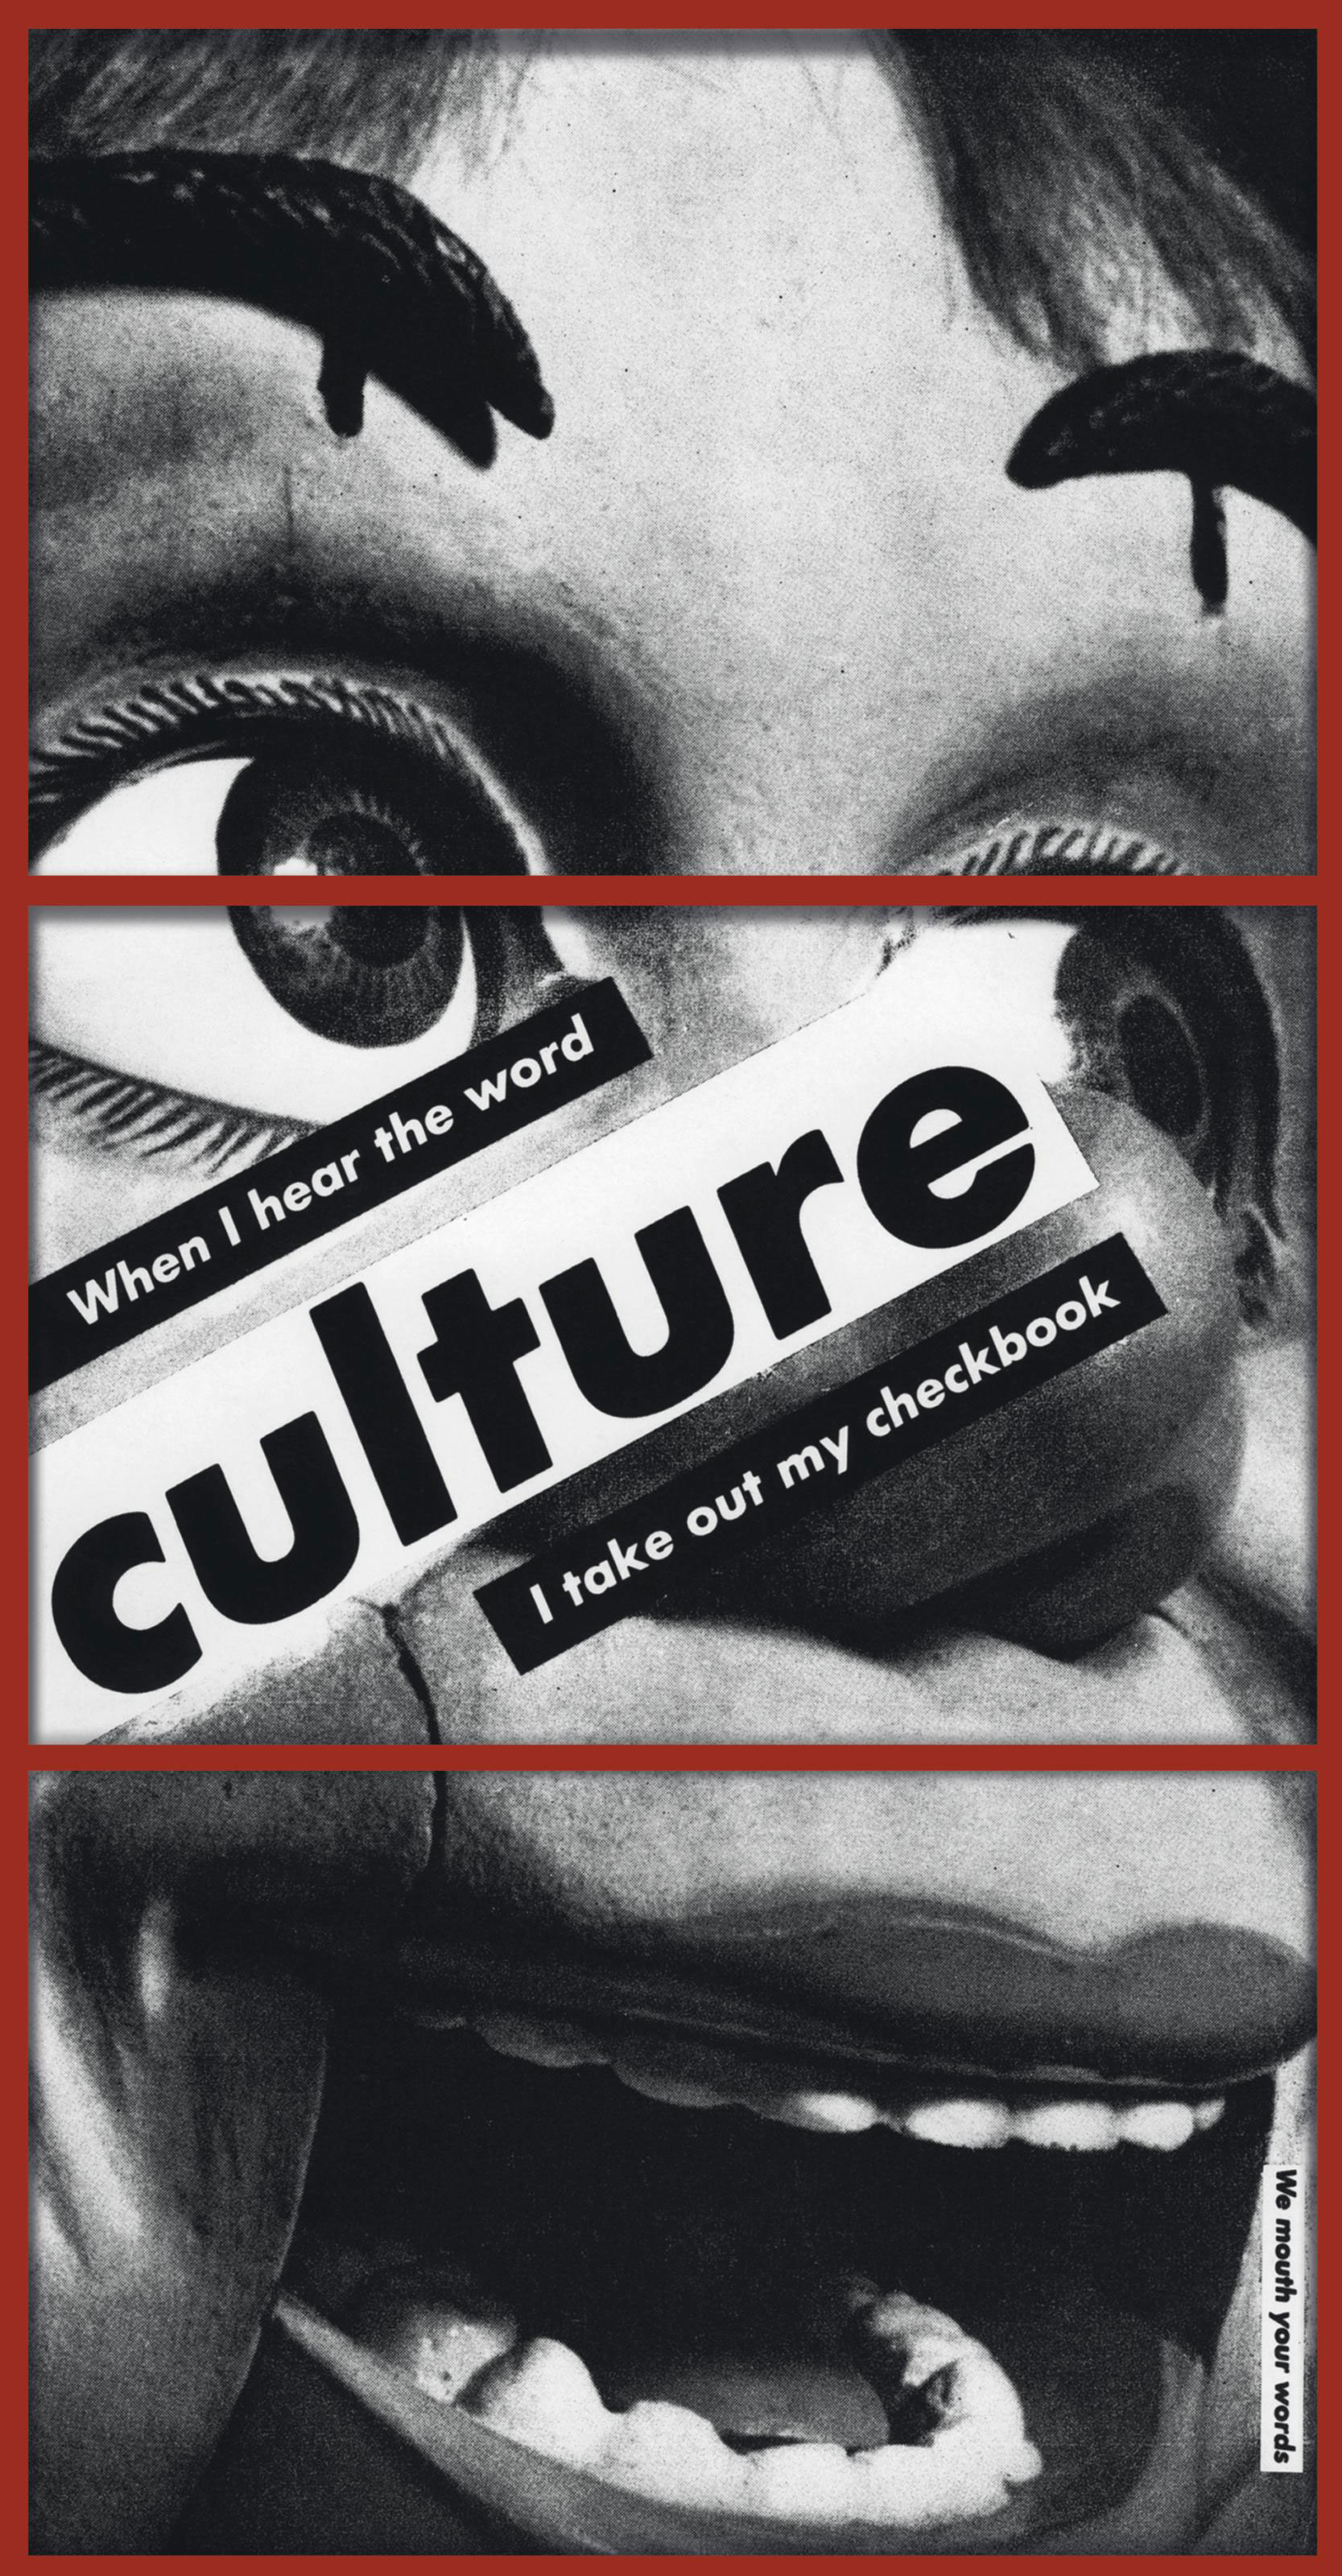 Barbara Kruger Untitled (When I hear the word culture I take out my checkbook) 1985